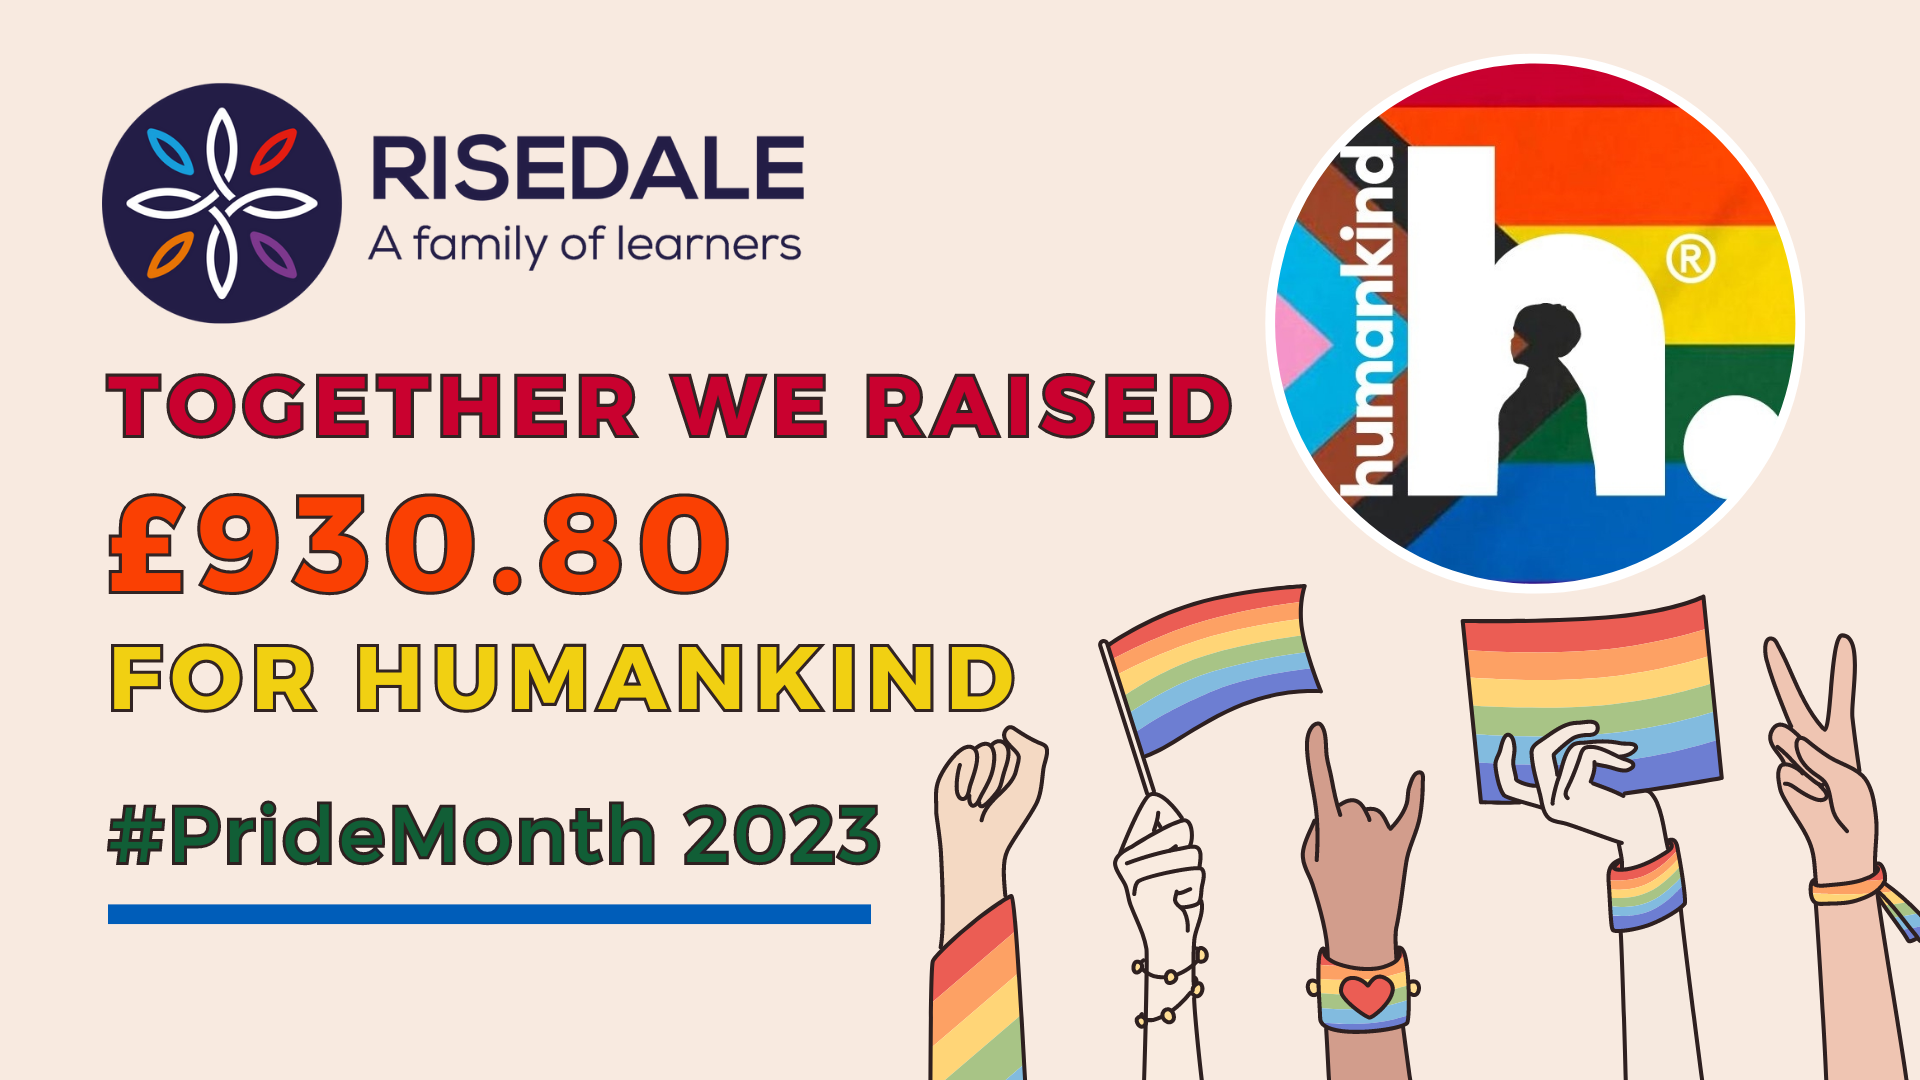 £930.80 raised for Humankind: